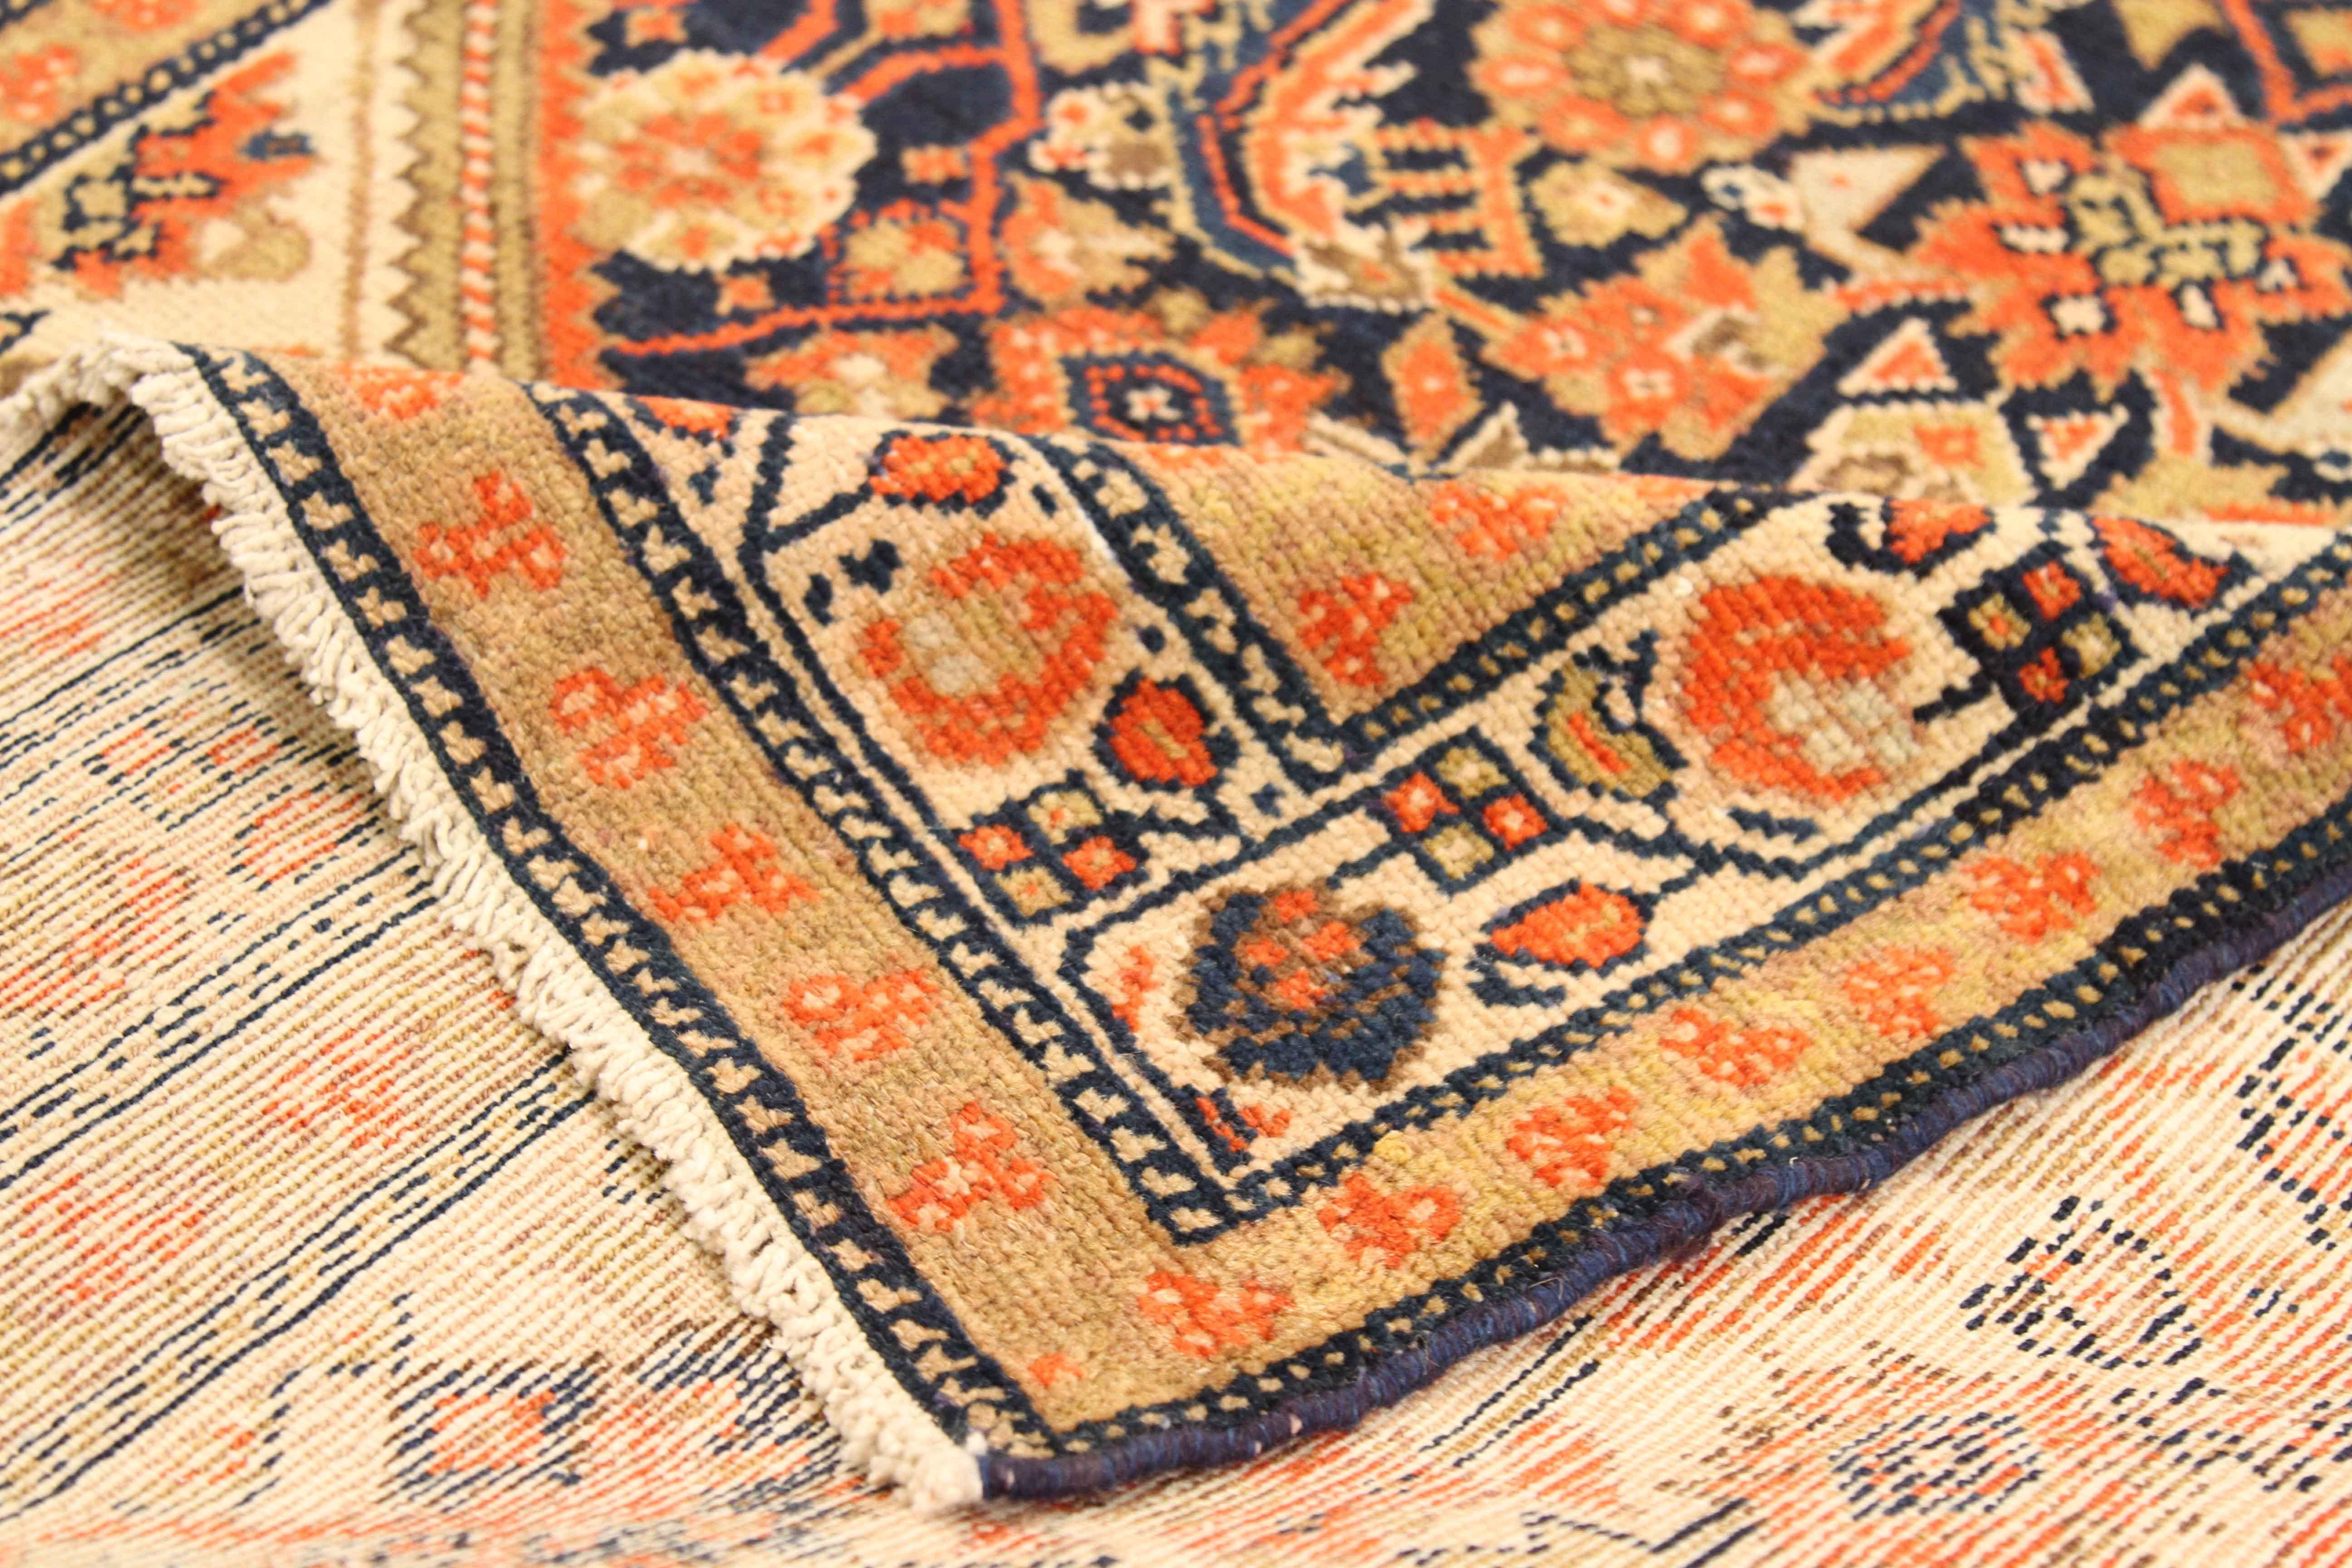 Hand-Woven Antique Persian Malayer Runner Rug with Navy & Orange Floral Motif on Ivory Fiel For Sale